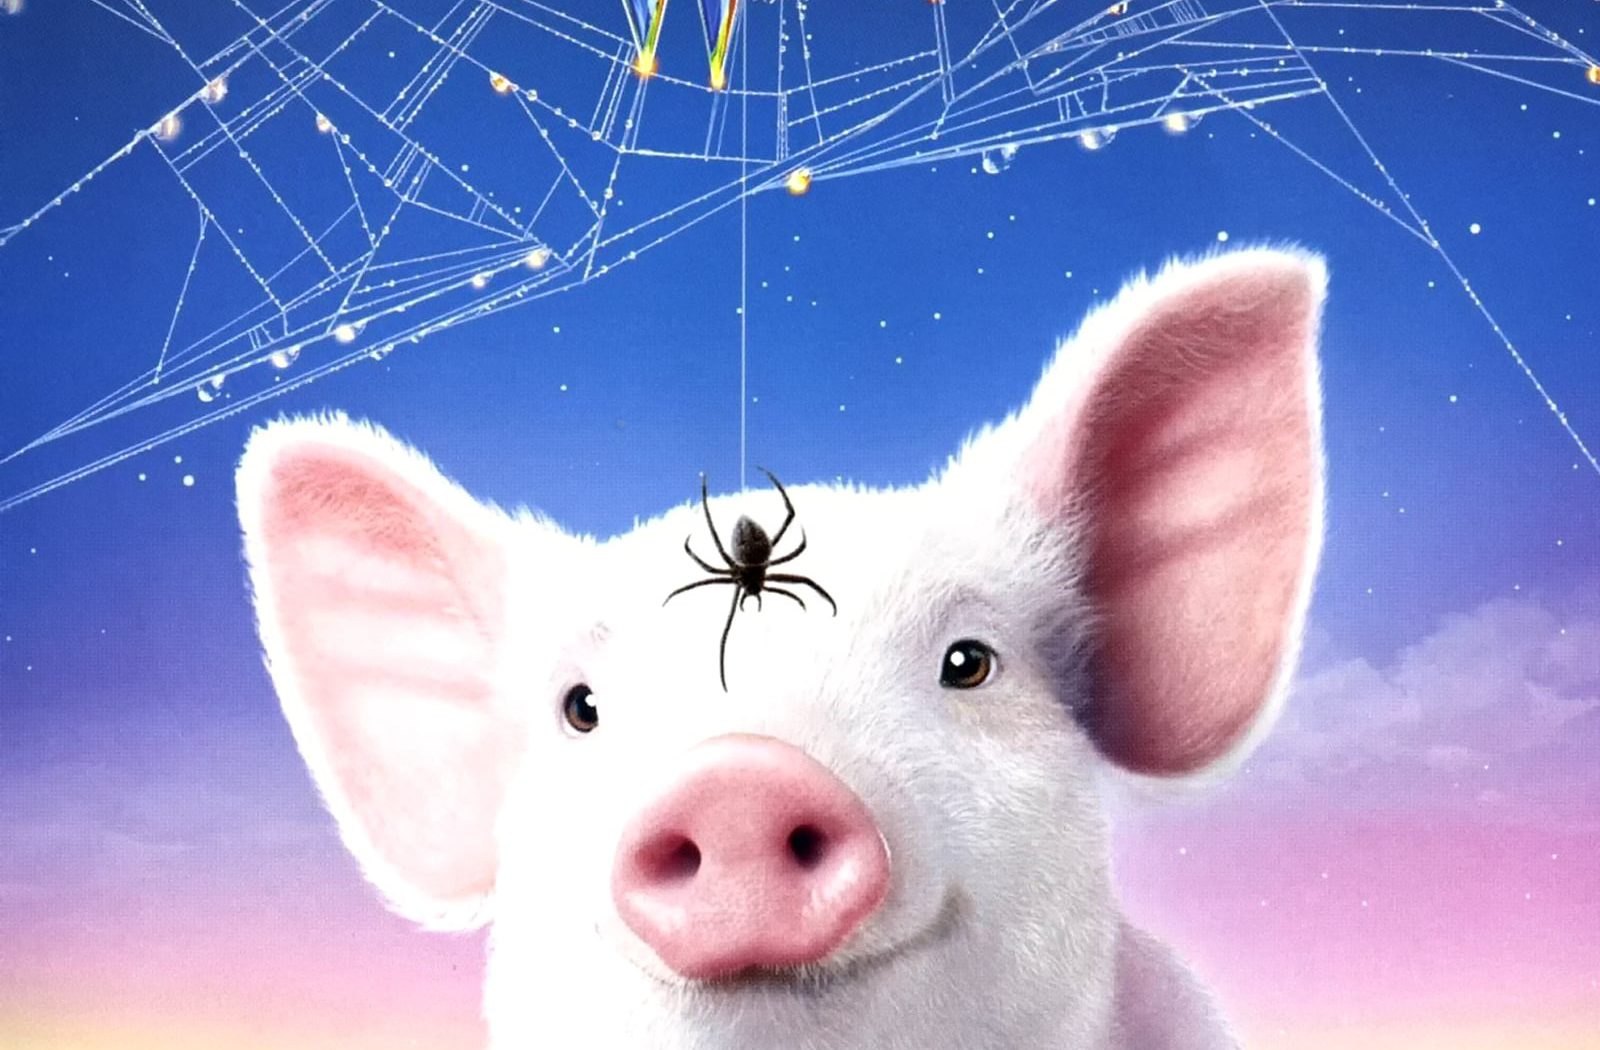 Poster for the movie "Charlotte's Web"